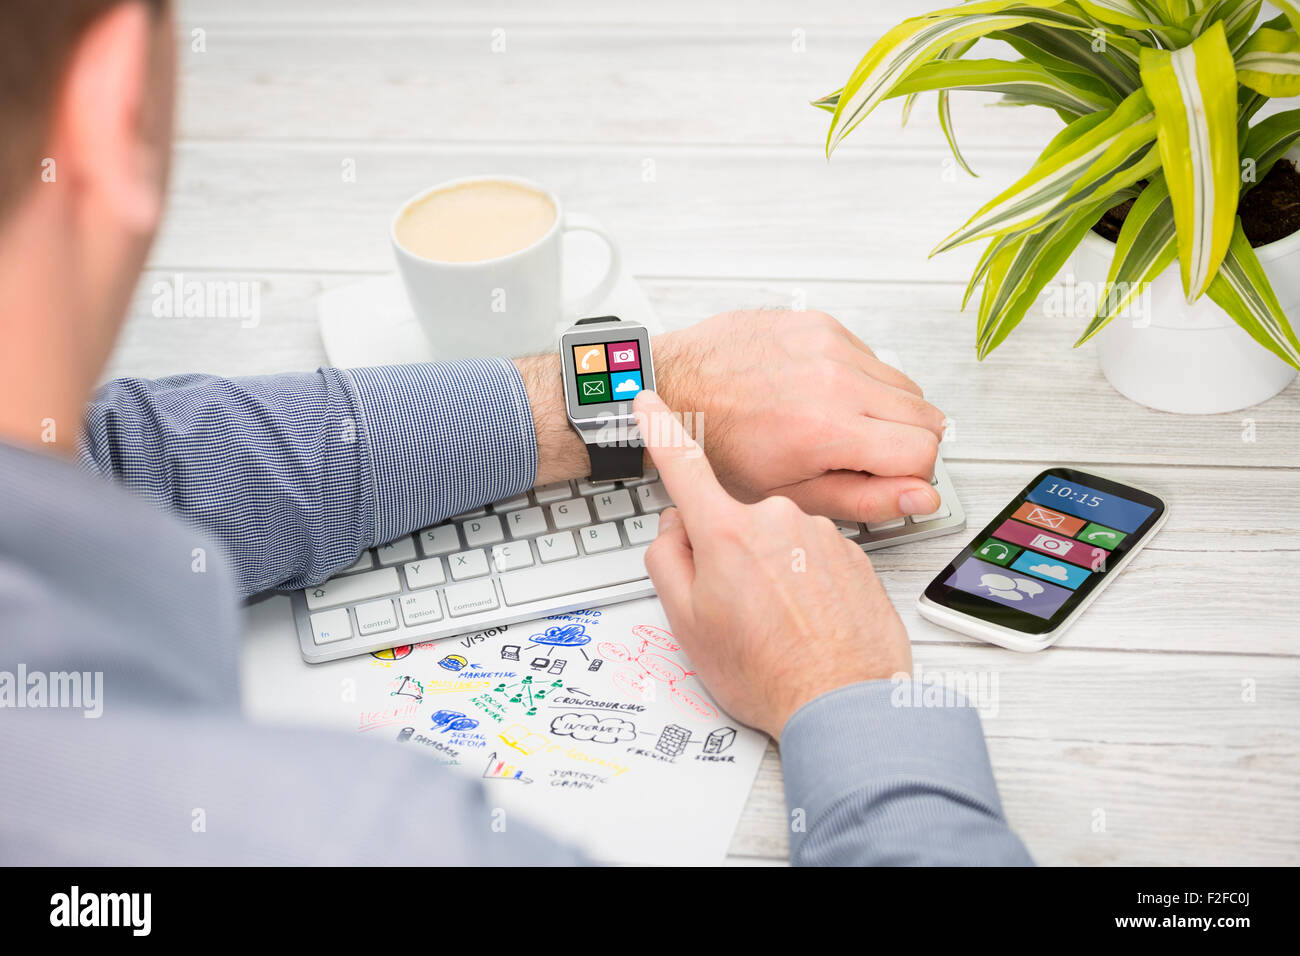 Businessman uses smart watch and phone. Smartwatch concept. Stock Photo